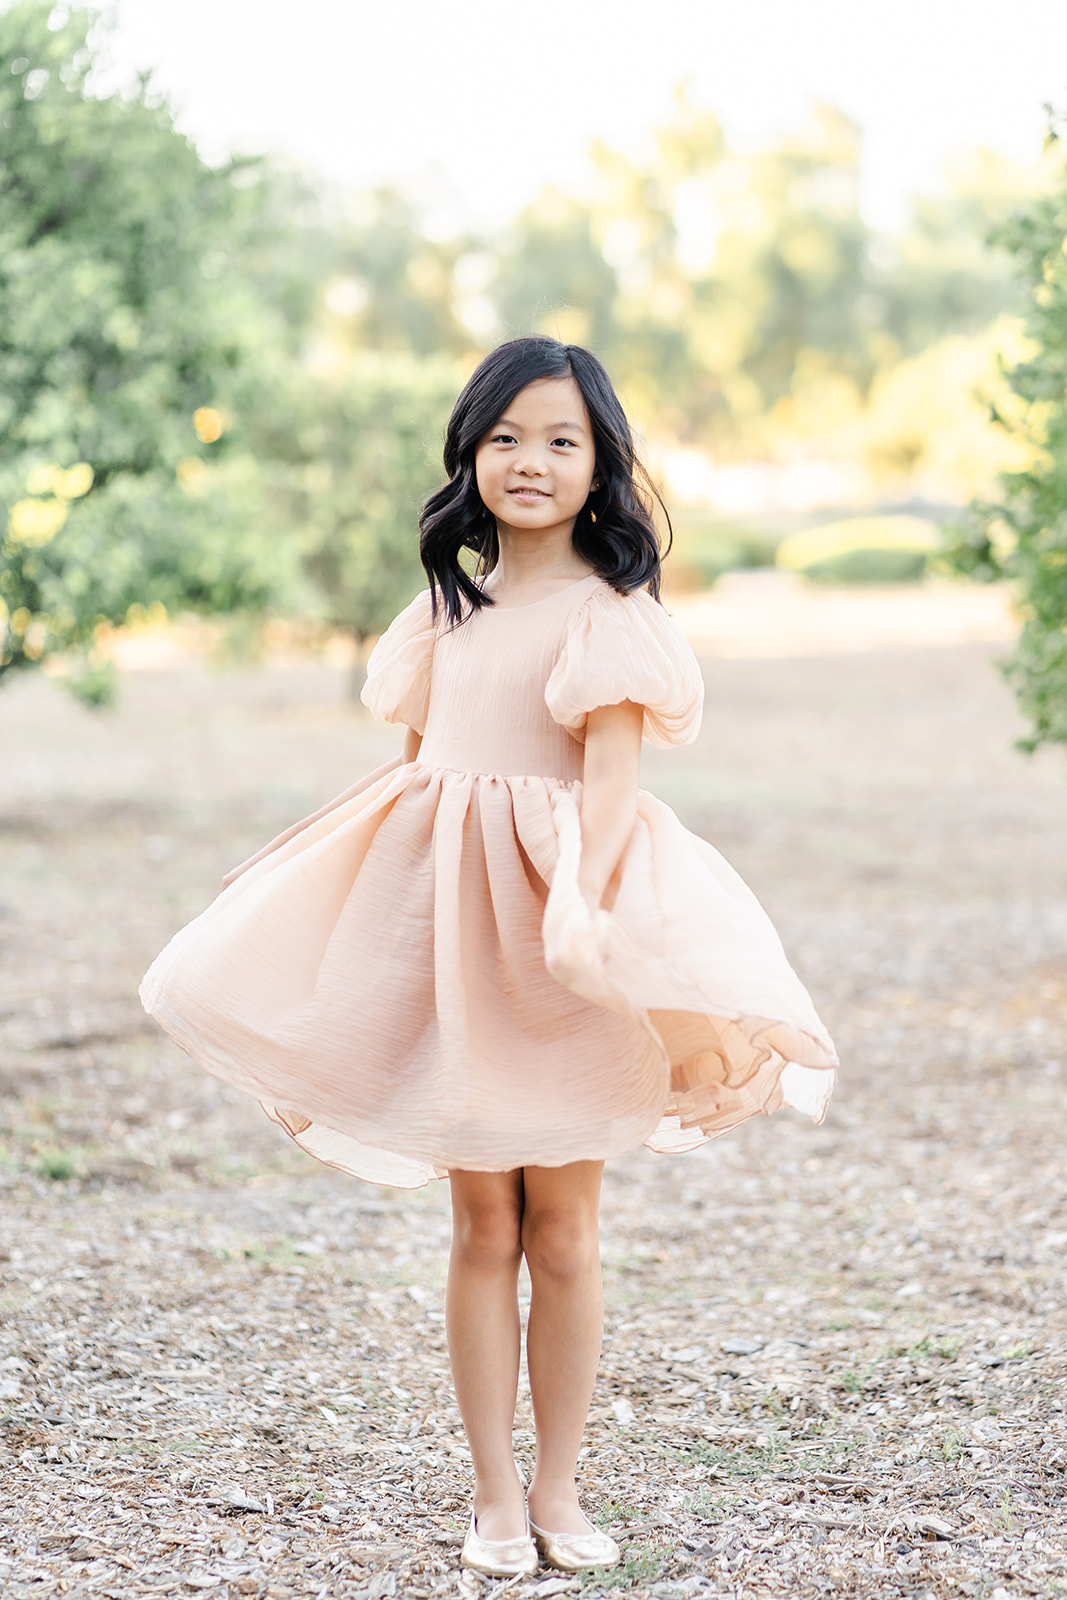 A young girl in a peach dress twirls while standing in an orange grove